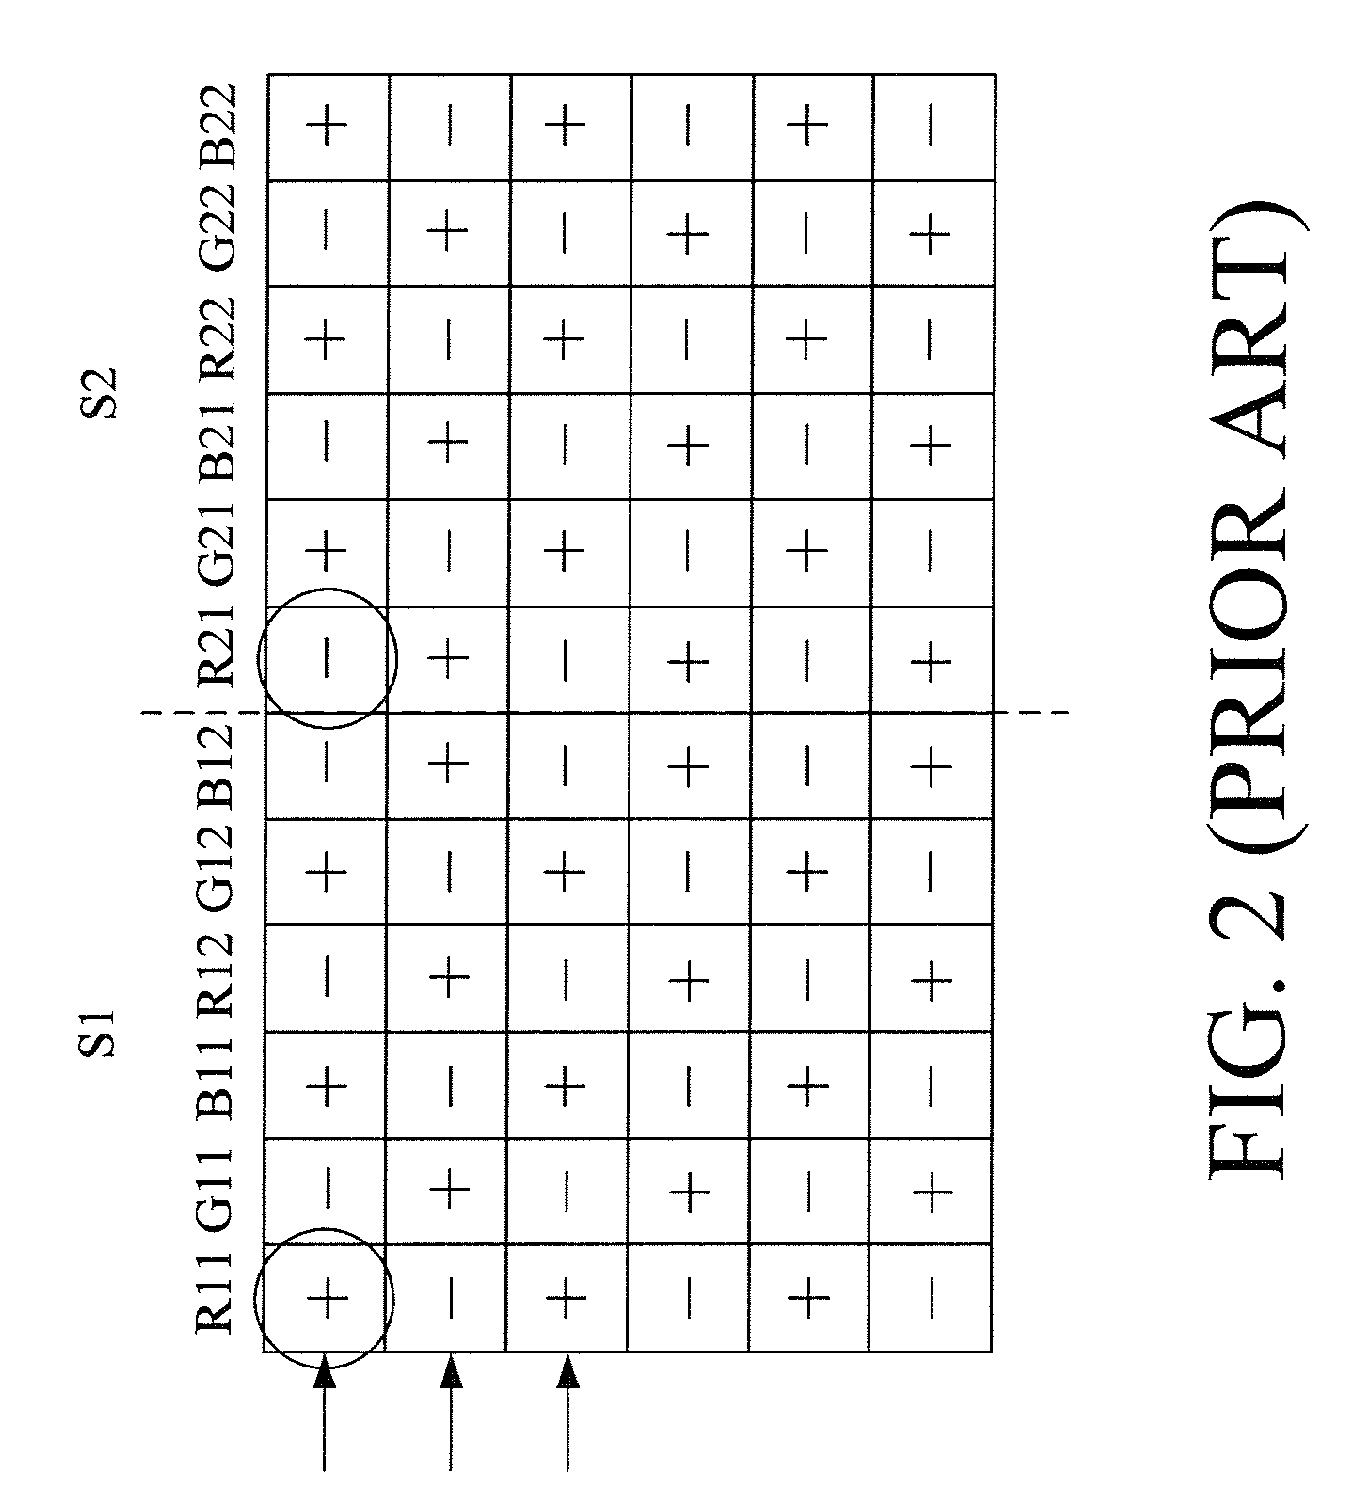 Data multiplexer architecture for realizing dot inversion mode for use in a liquid crystal display device and associated driving method